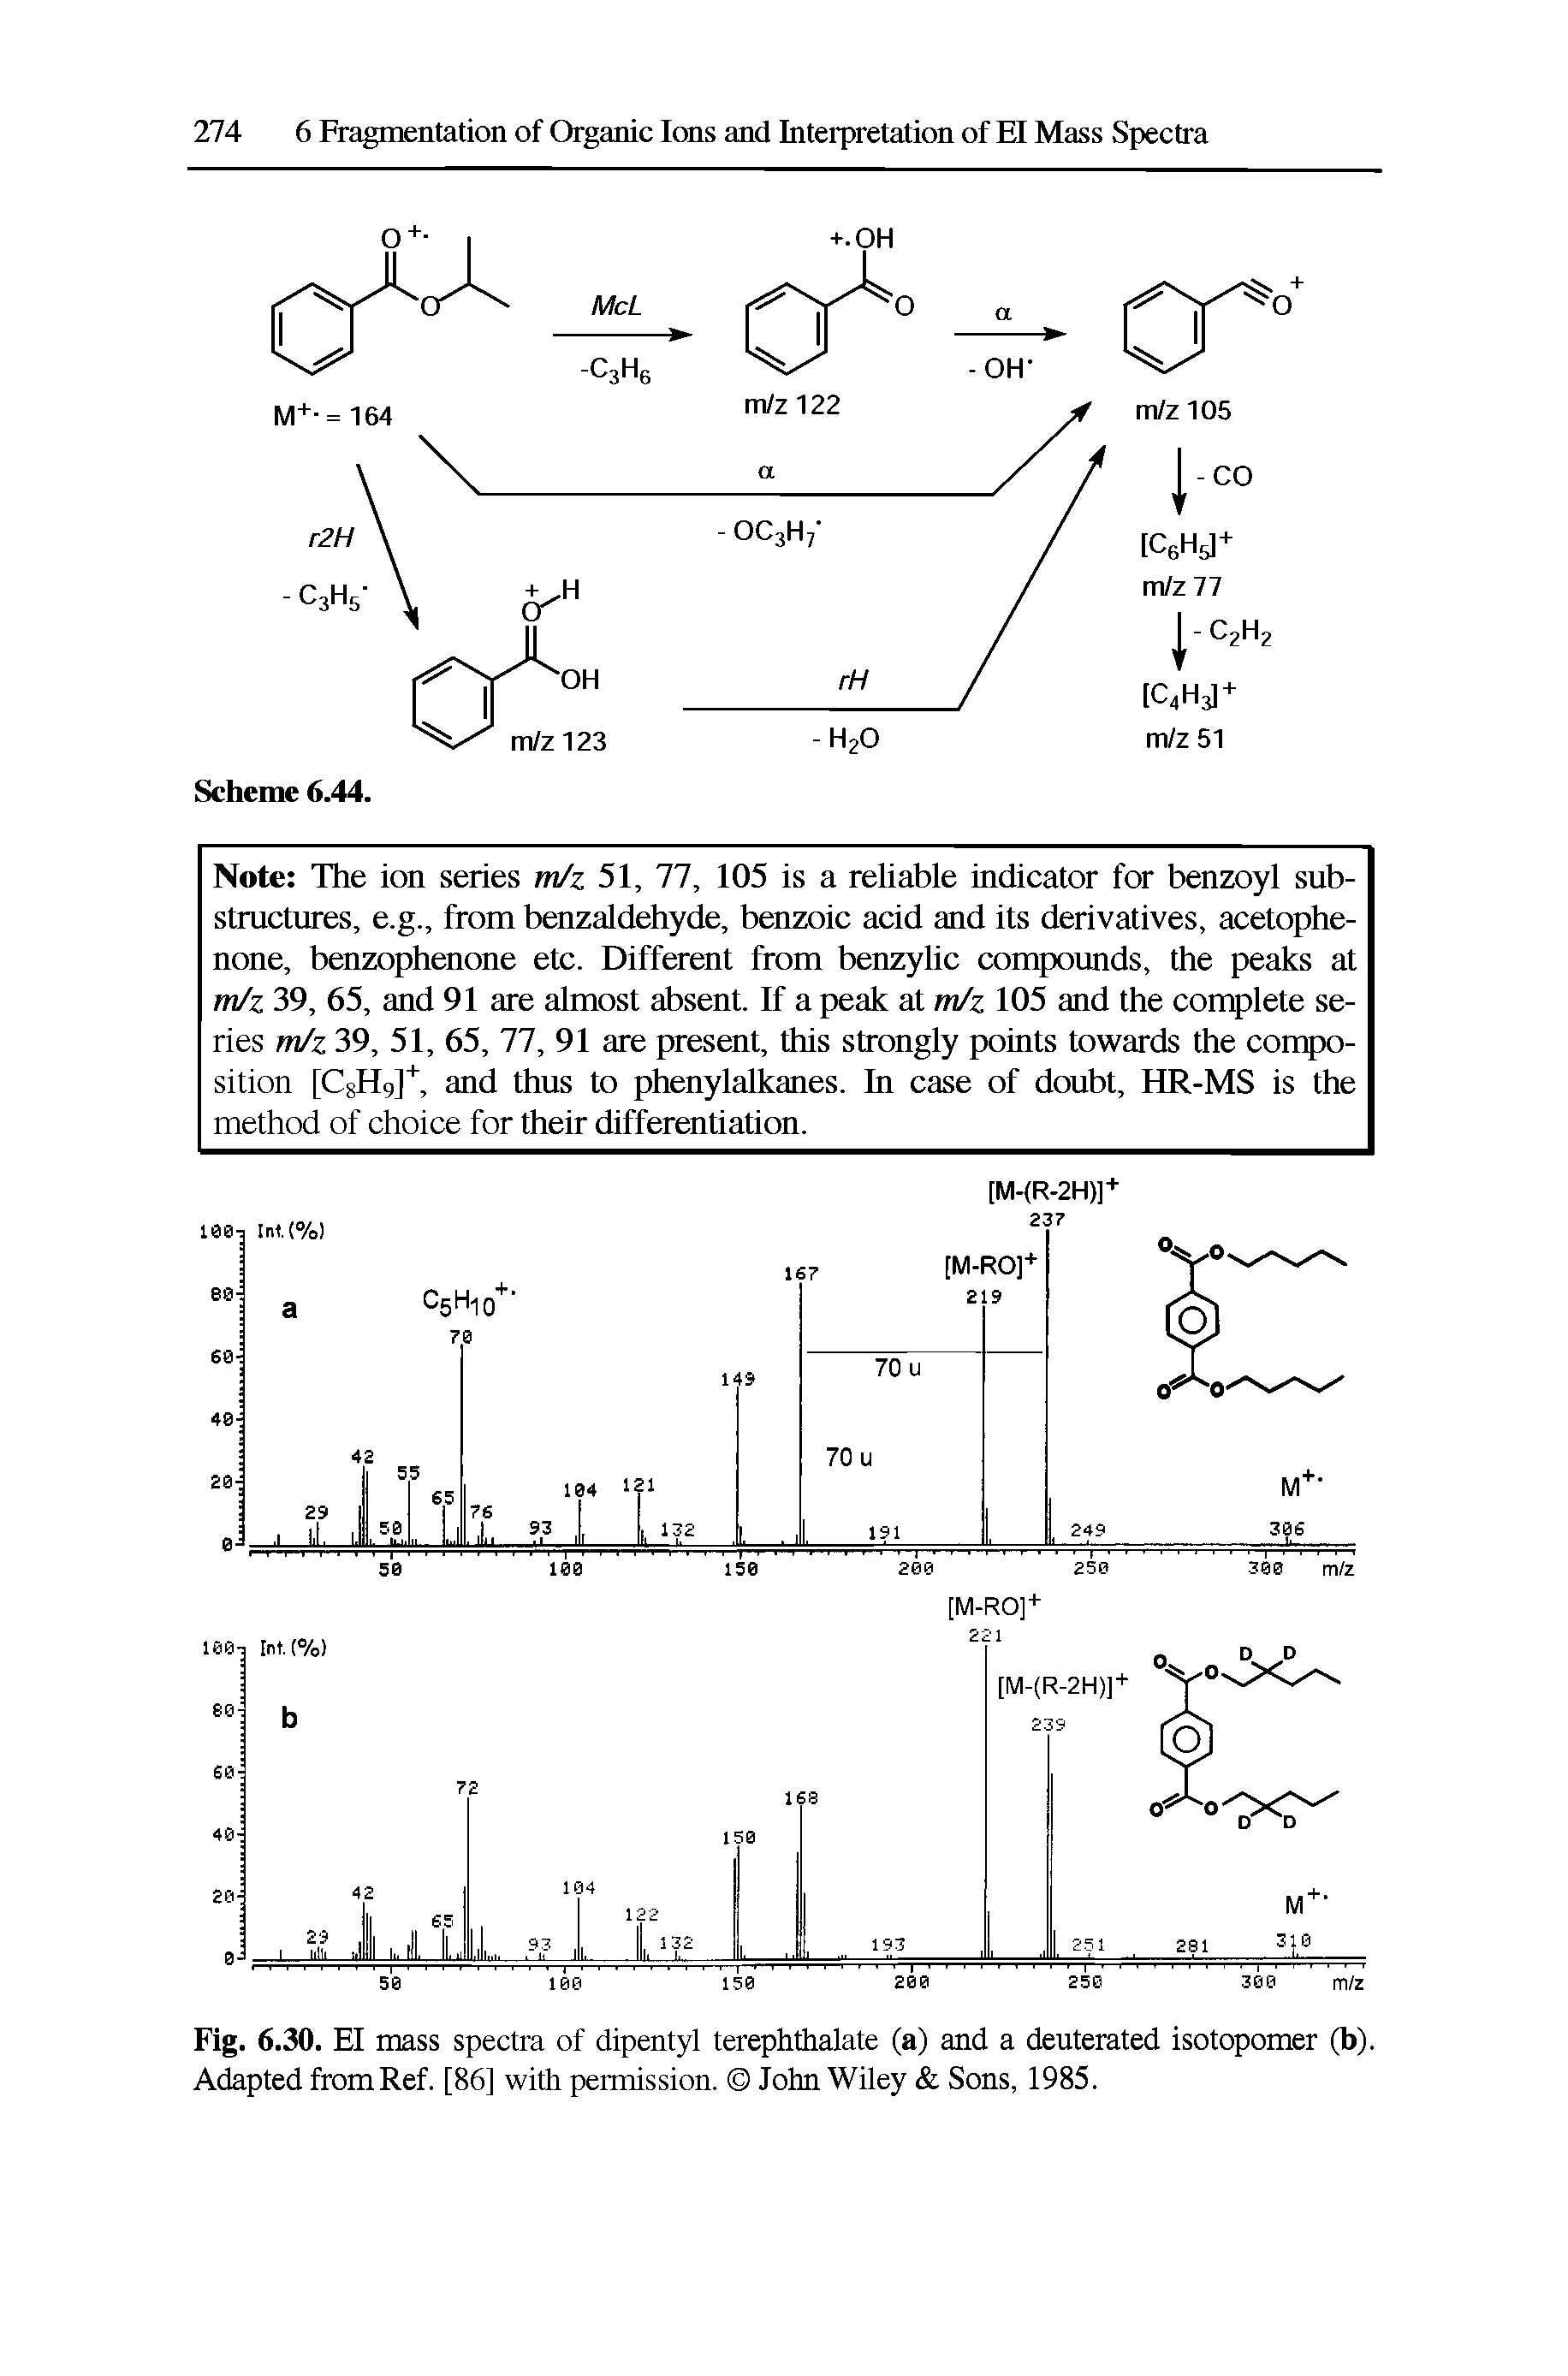 Fig. 6.30. El mass spectra of dipentyl terephthalate (a) and a deuterated isotopomer (b). Adapted fromRef. [86] with permission. John Wiley Sons, 1985.